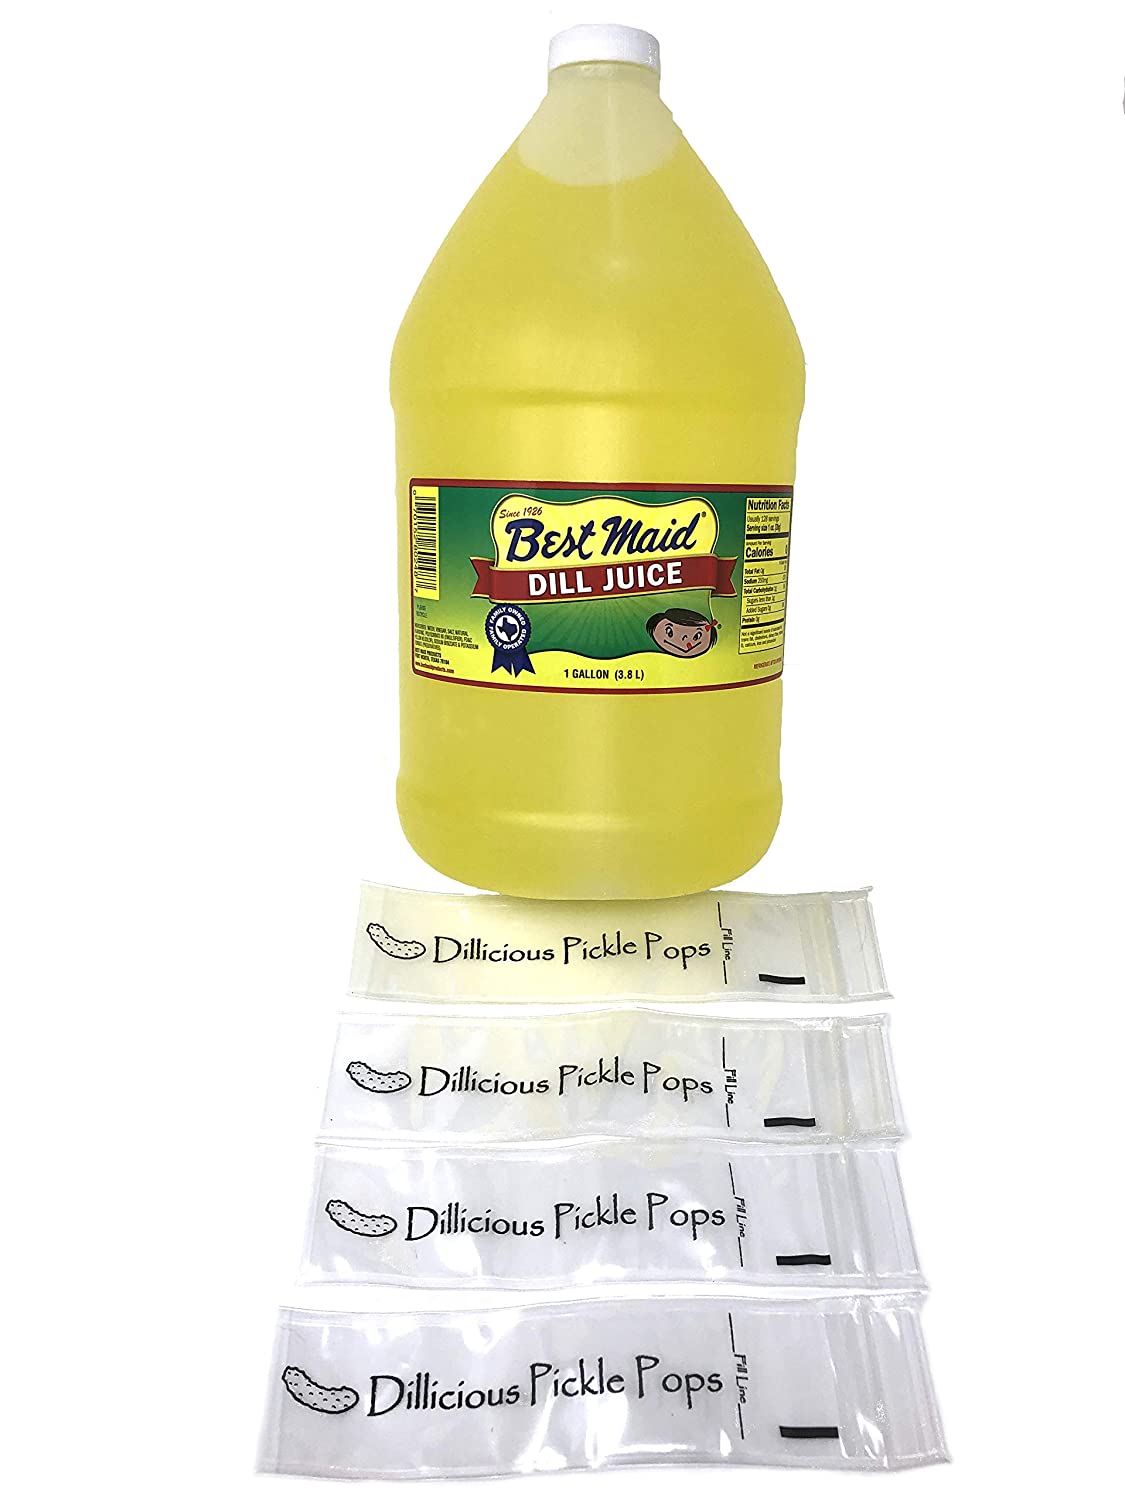 DILLicious Pickle Pops Bundle - 1 Gallon Bottle of Best Maid Dill Juice Plus 43 DILLicious Pickle Pop Bags - Make Your Own Pickle Popsicles At Home!